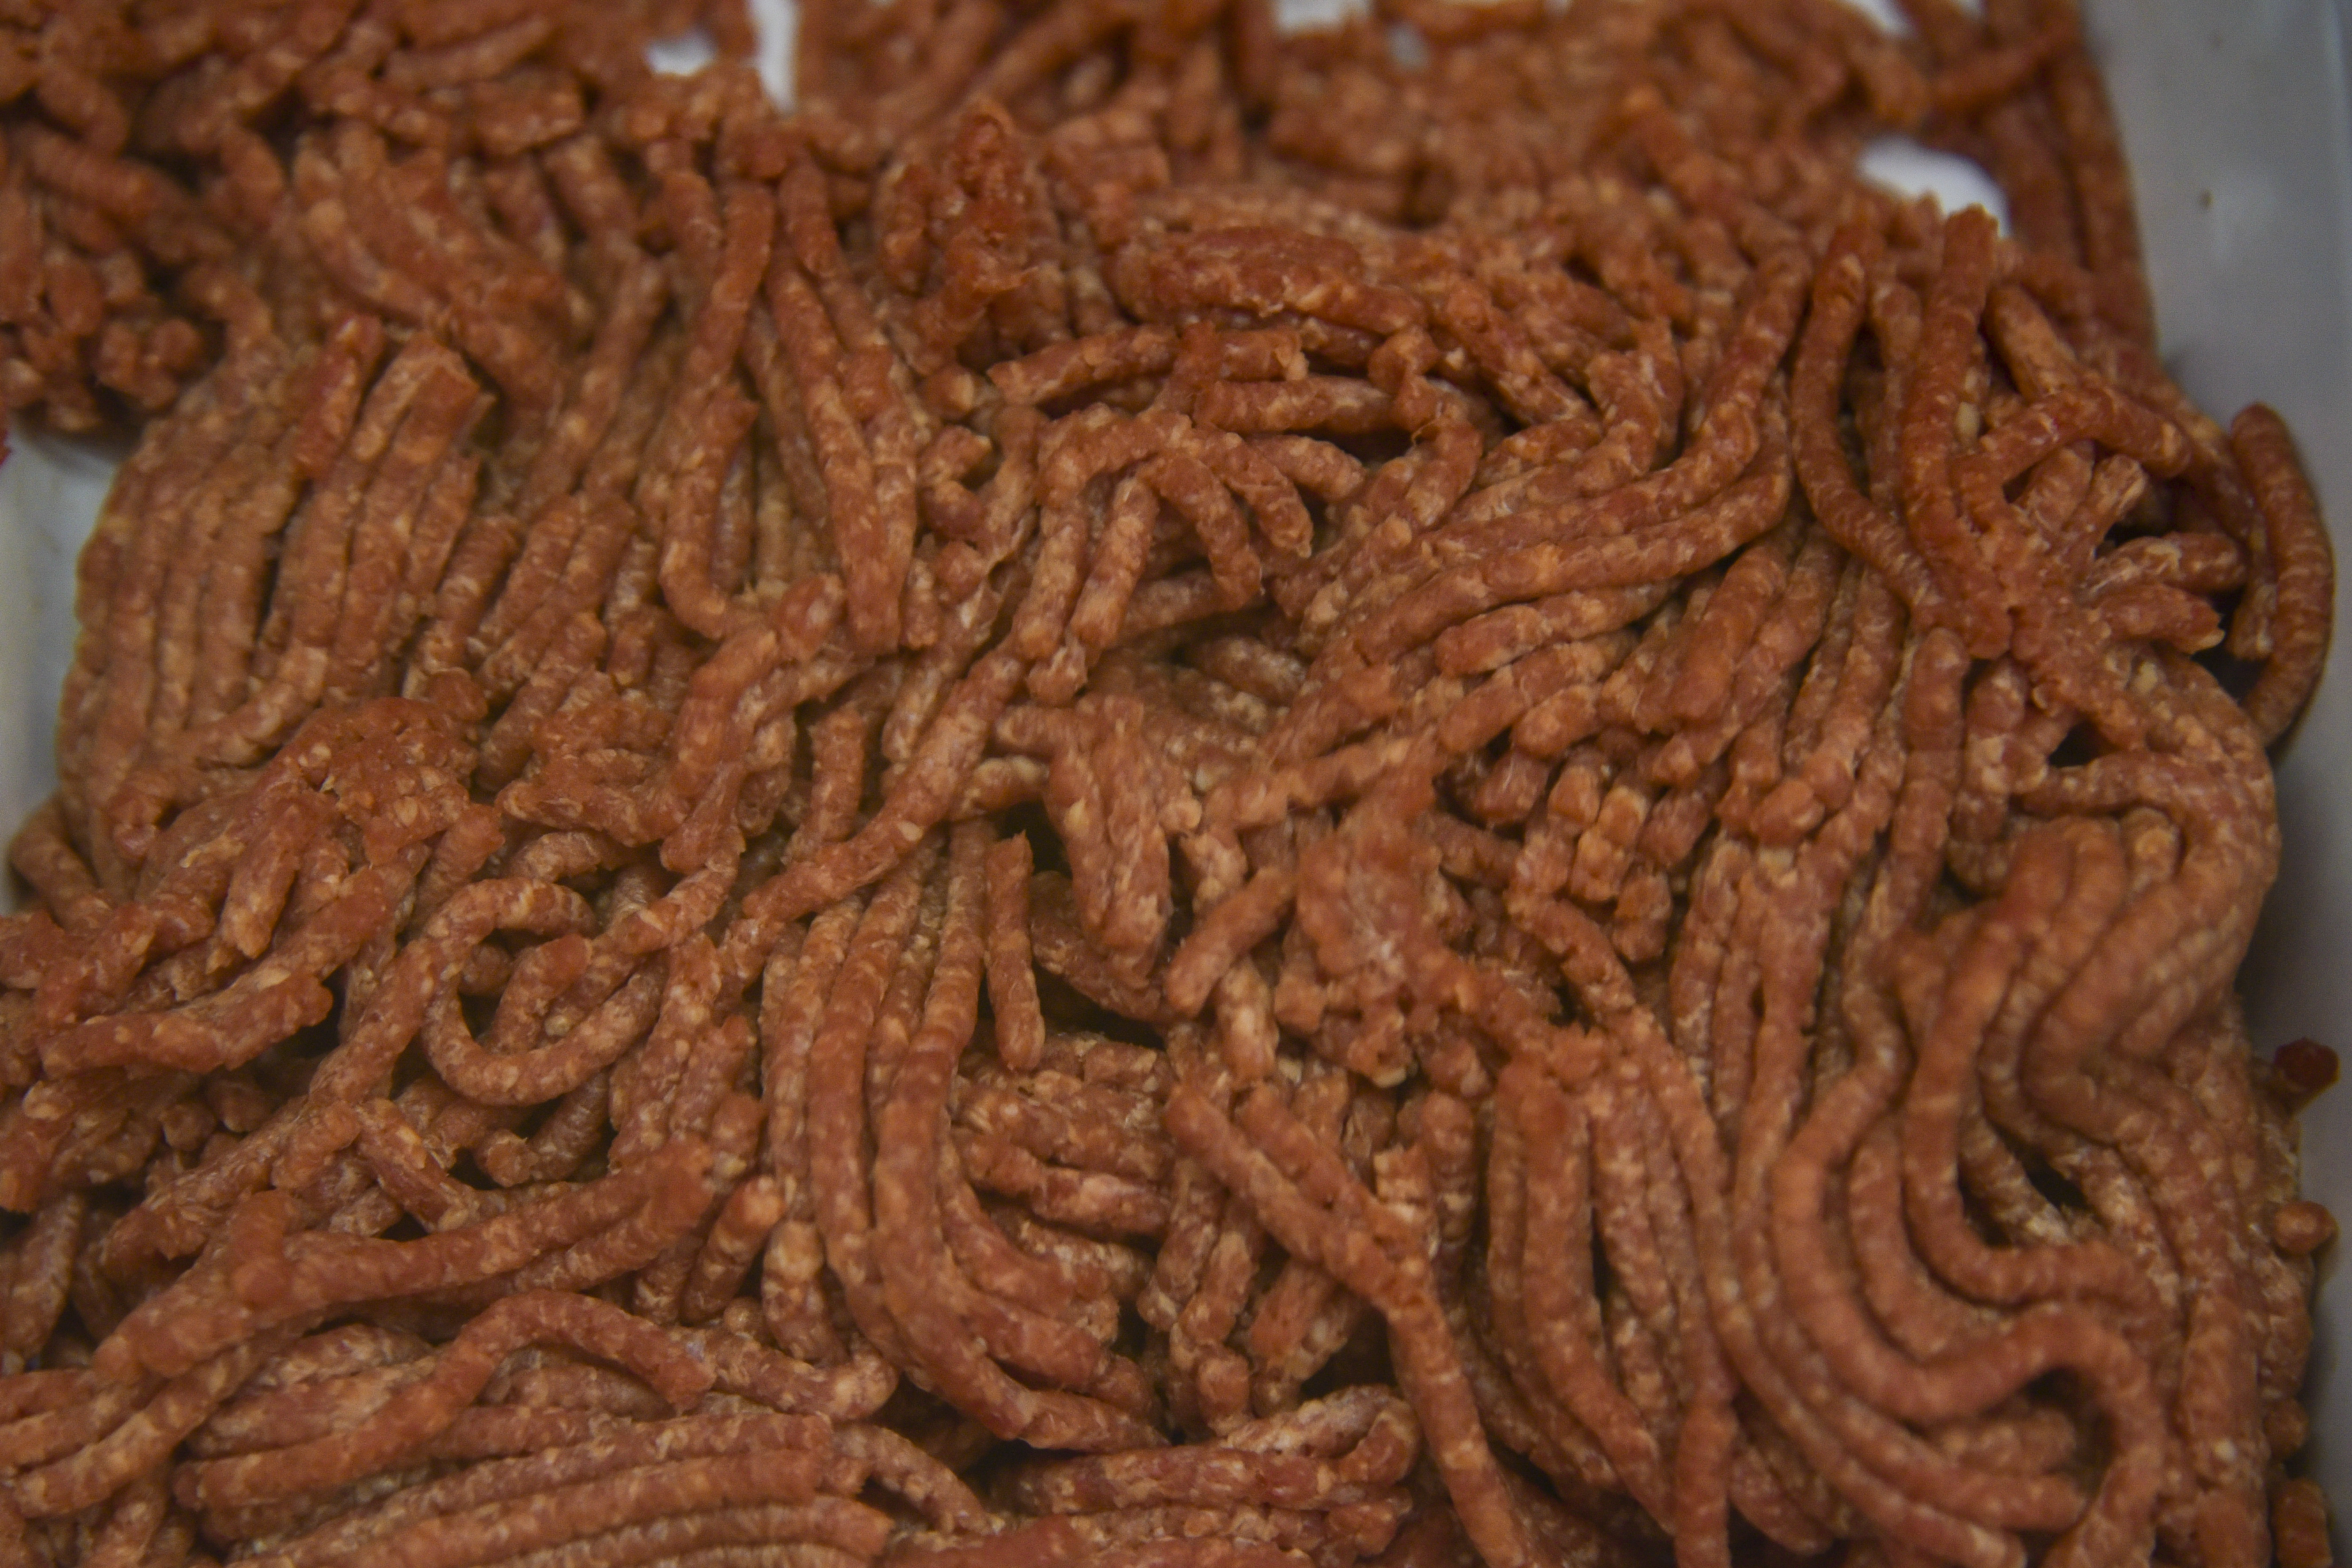 Ground beef distributed in Michigan has been recalled due to possible E. coli contamination